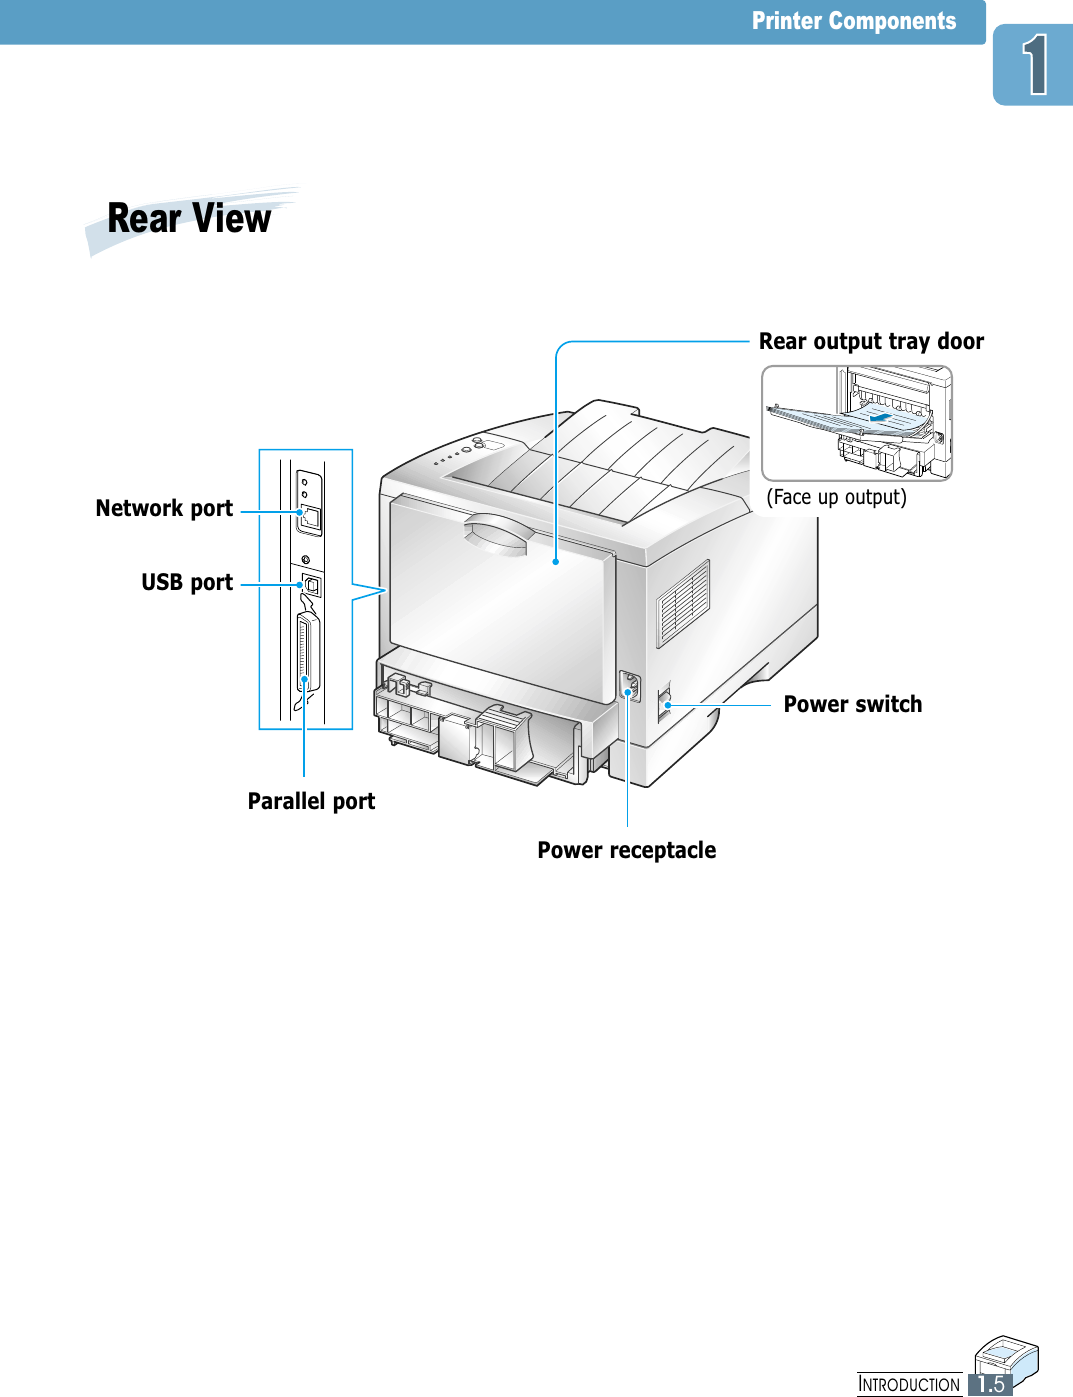 INTRODUCTION1.5Printer Components(Face up output)Rear ViewPower switchRear output tray doorPower receptacleParallel portUSB portNetwork port